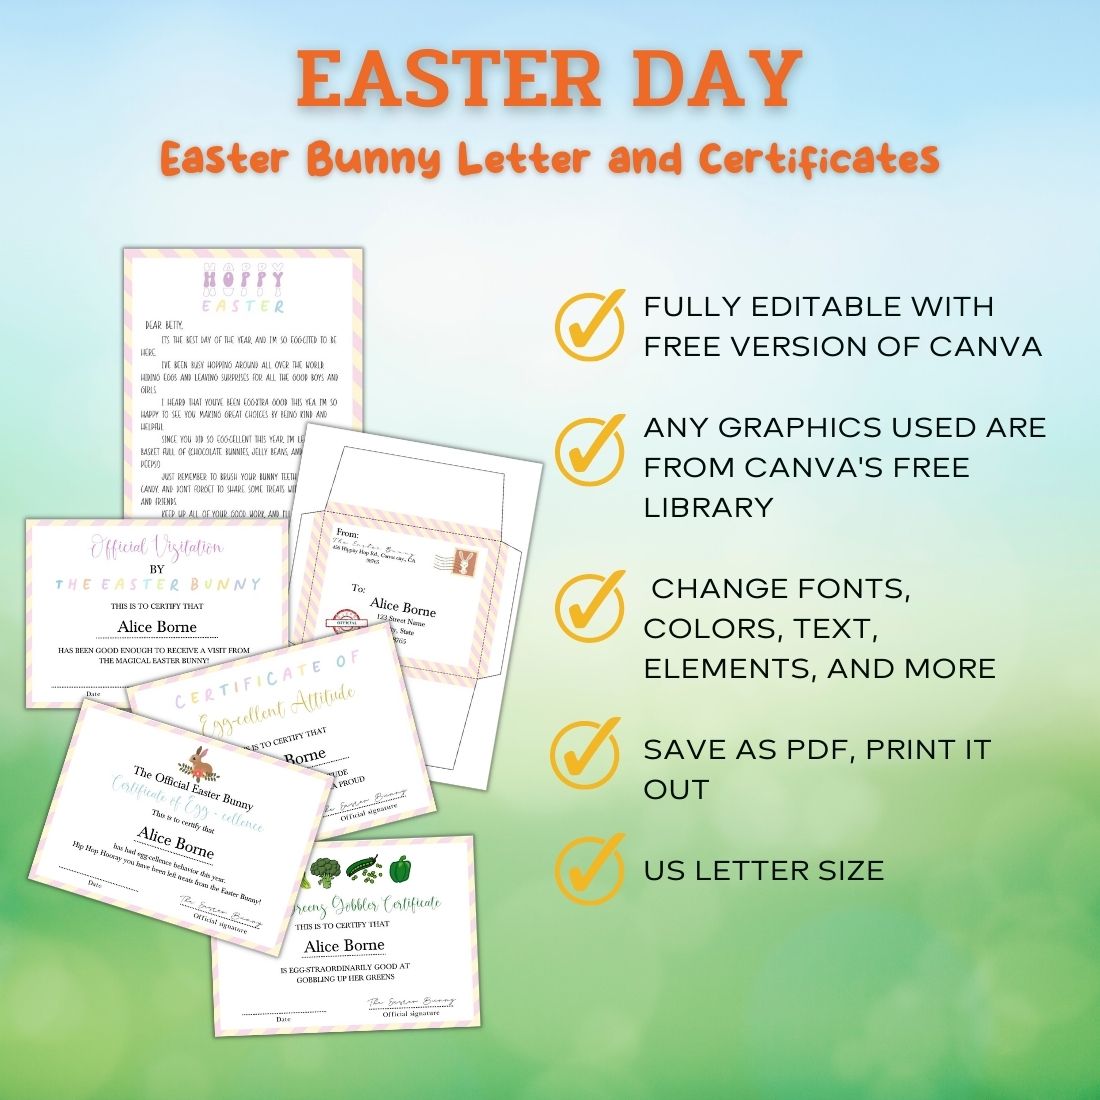 Easter bunny letter and certificate.